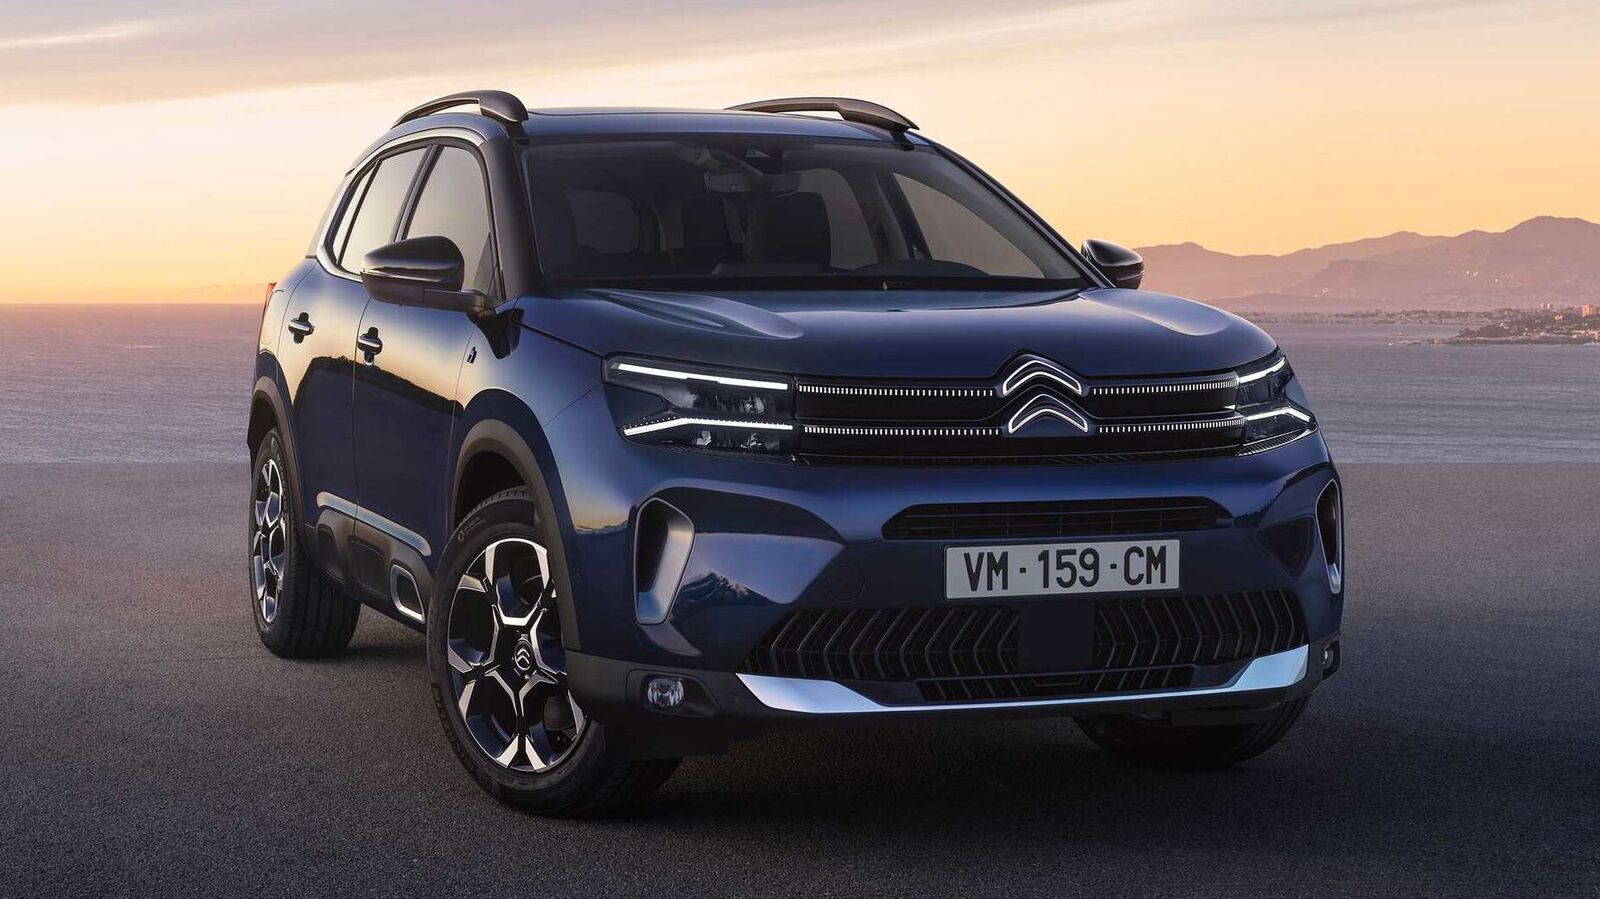 Citroen C5 Aircross facelift SUV teased, to launch soon in India